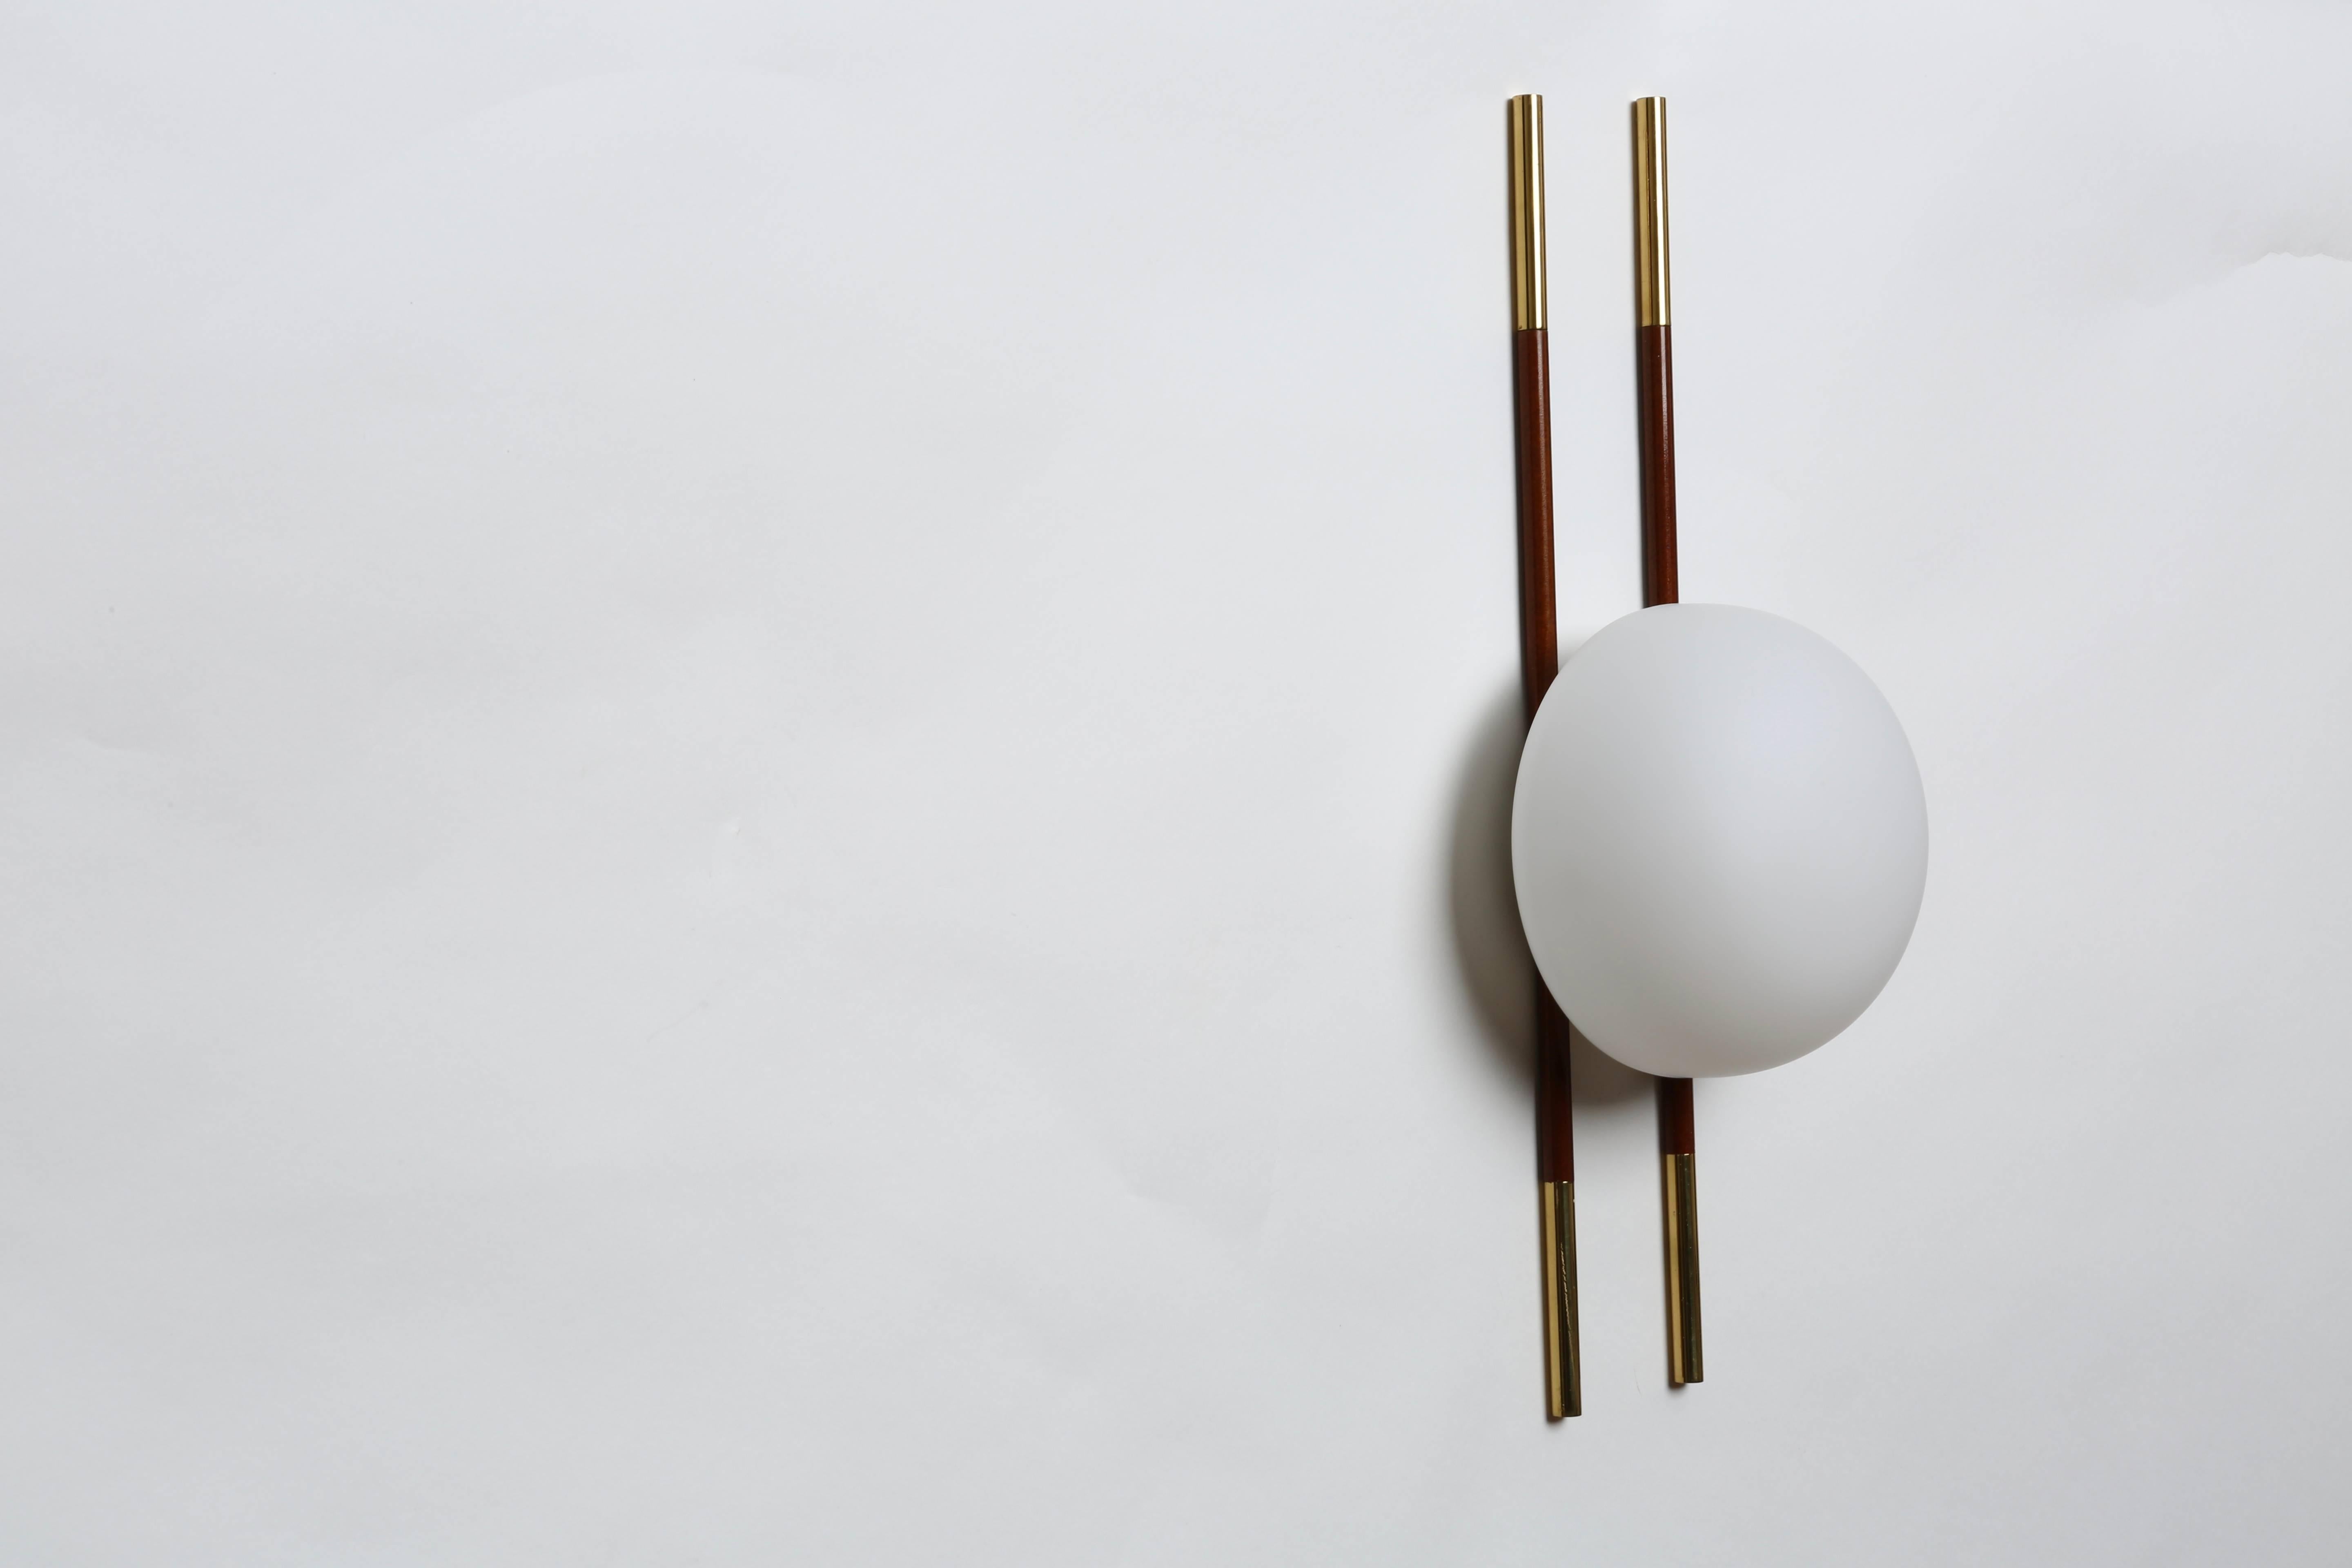 Wall lamp by Lunel.
Opaline satin glass, wood and brass.